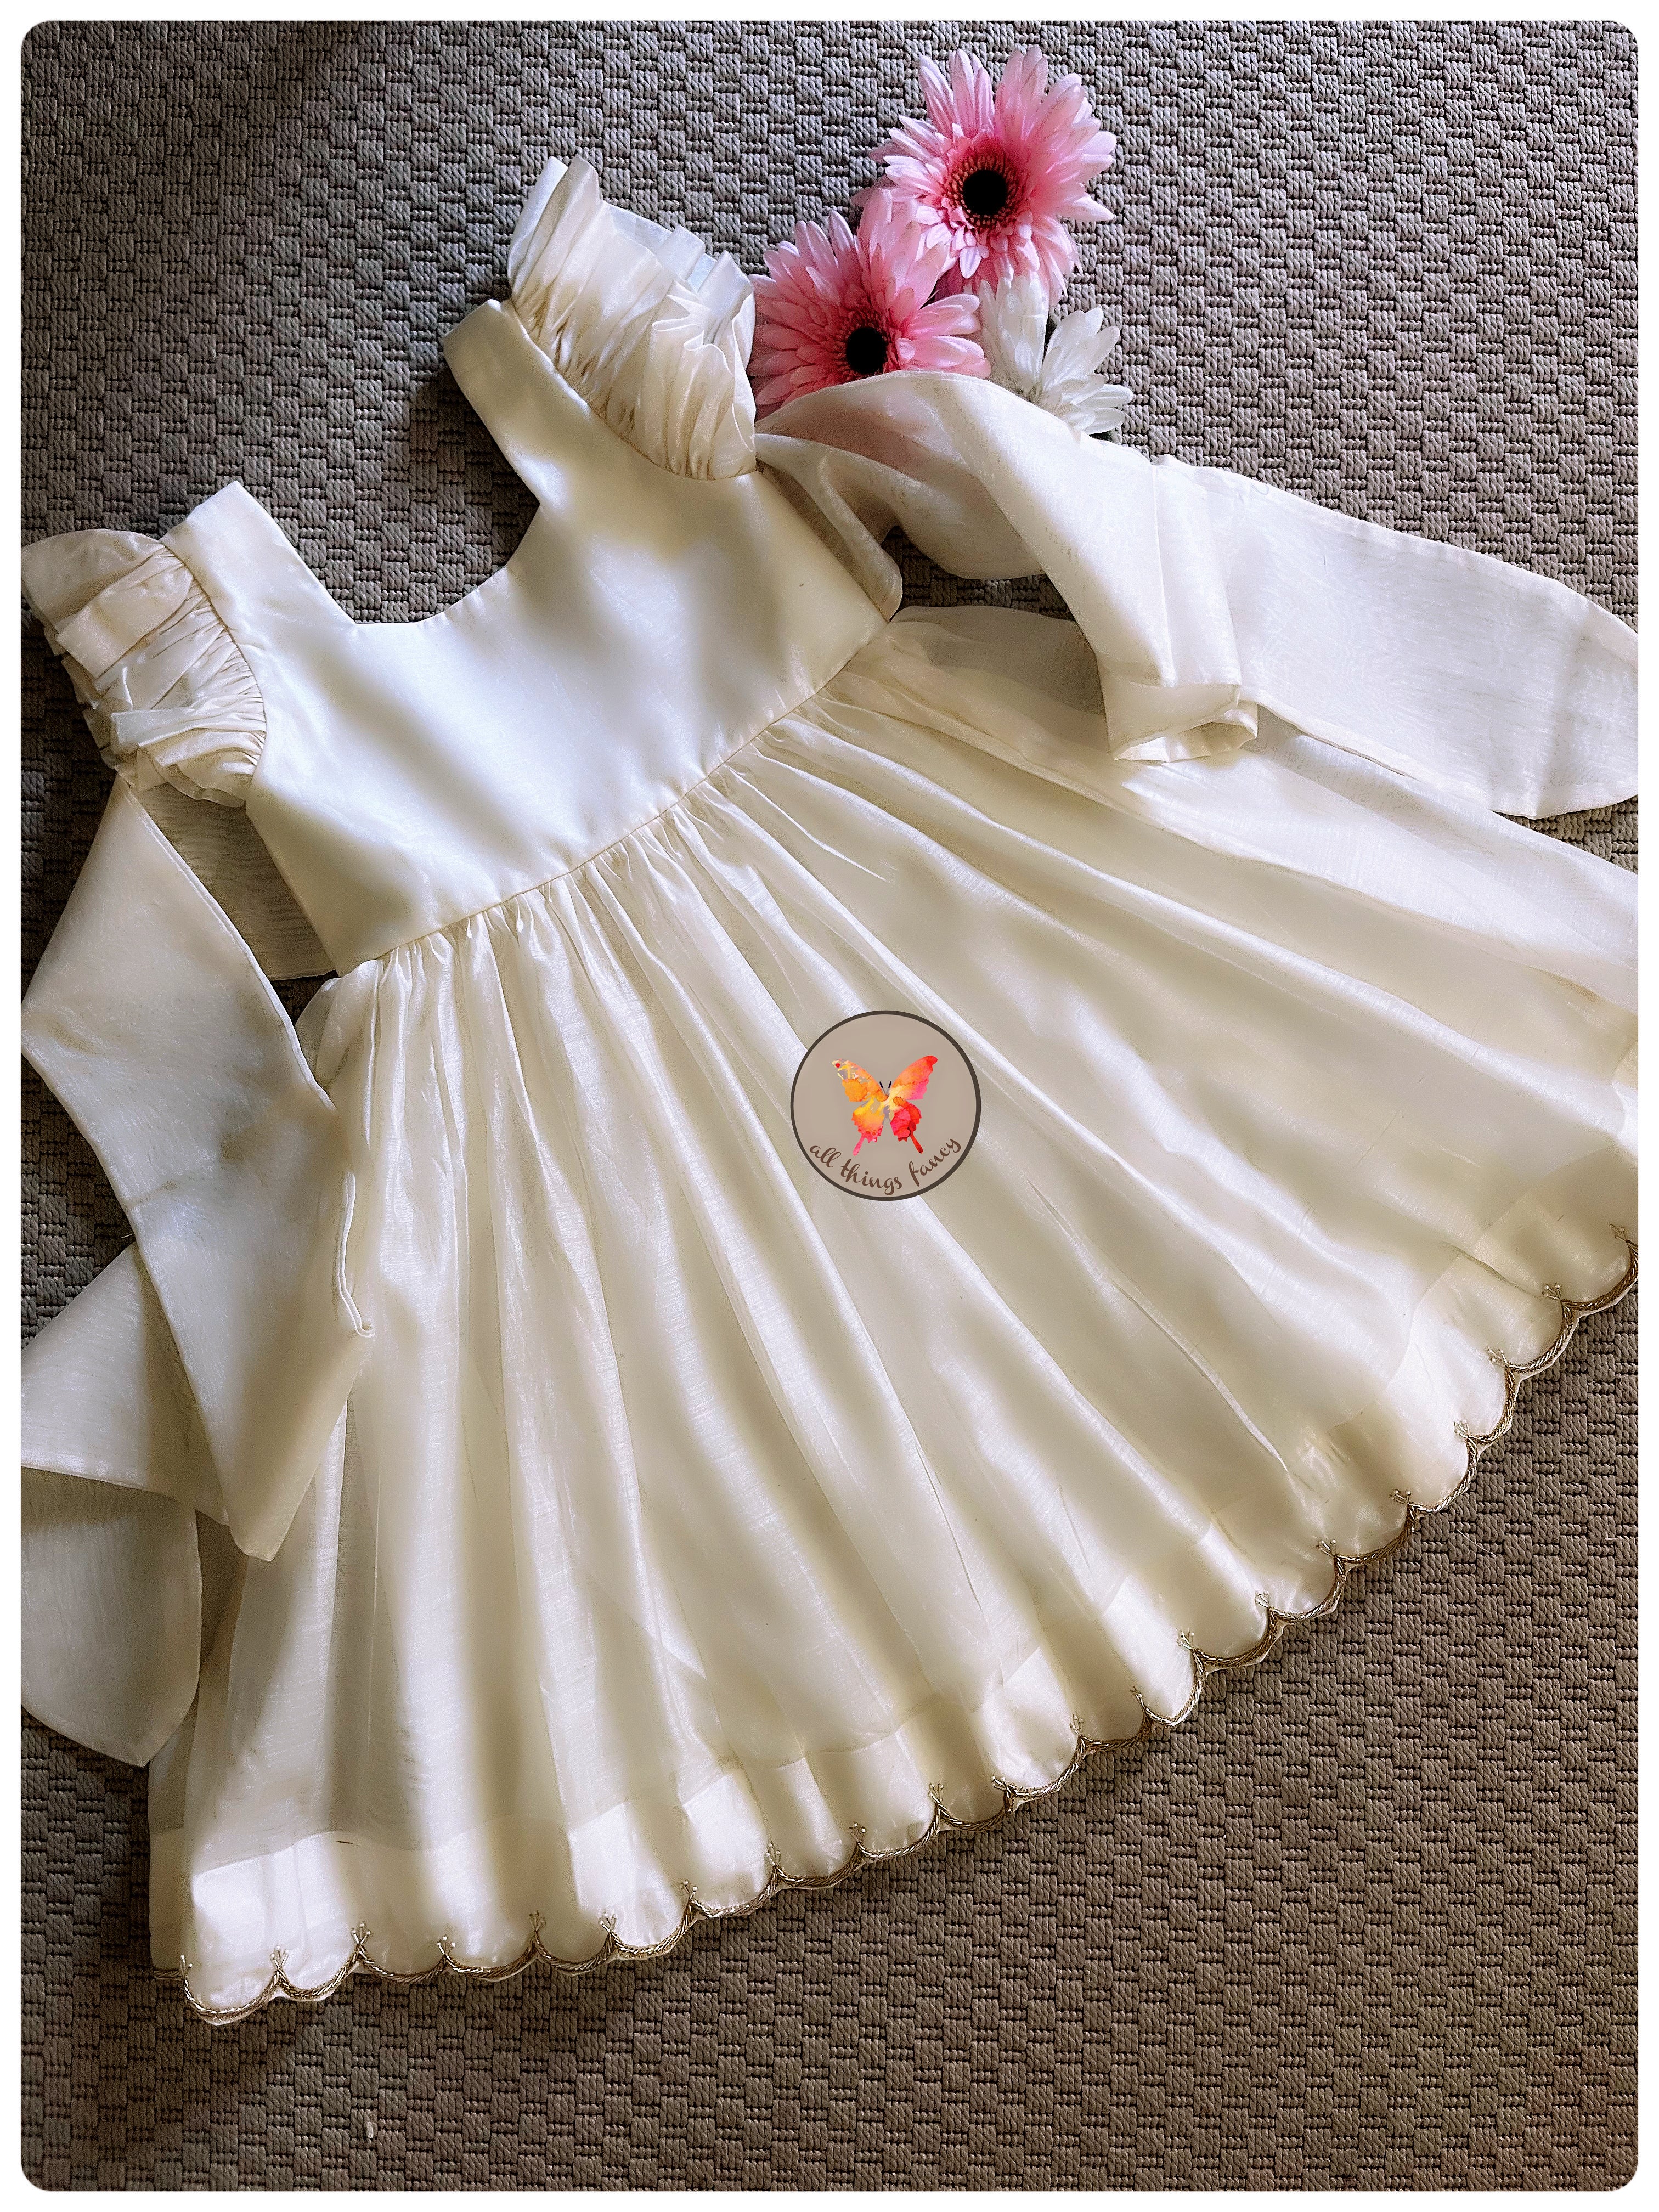 The Embroidered Bunny Tie- Ivory Dress